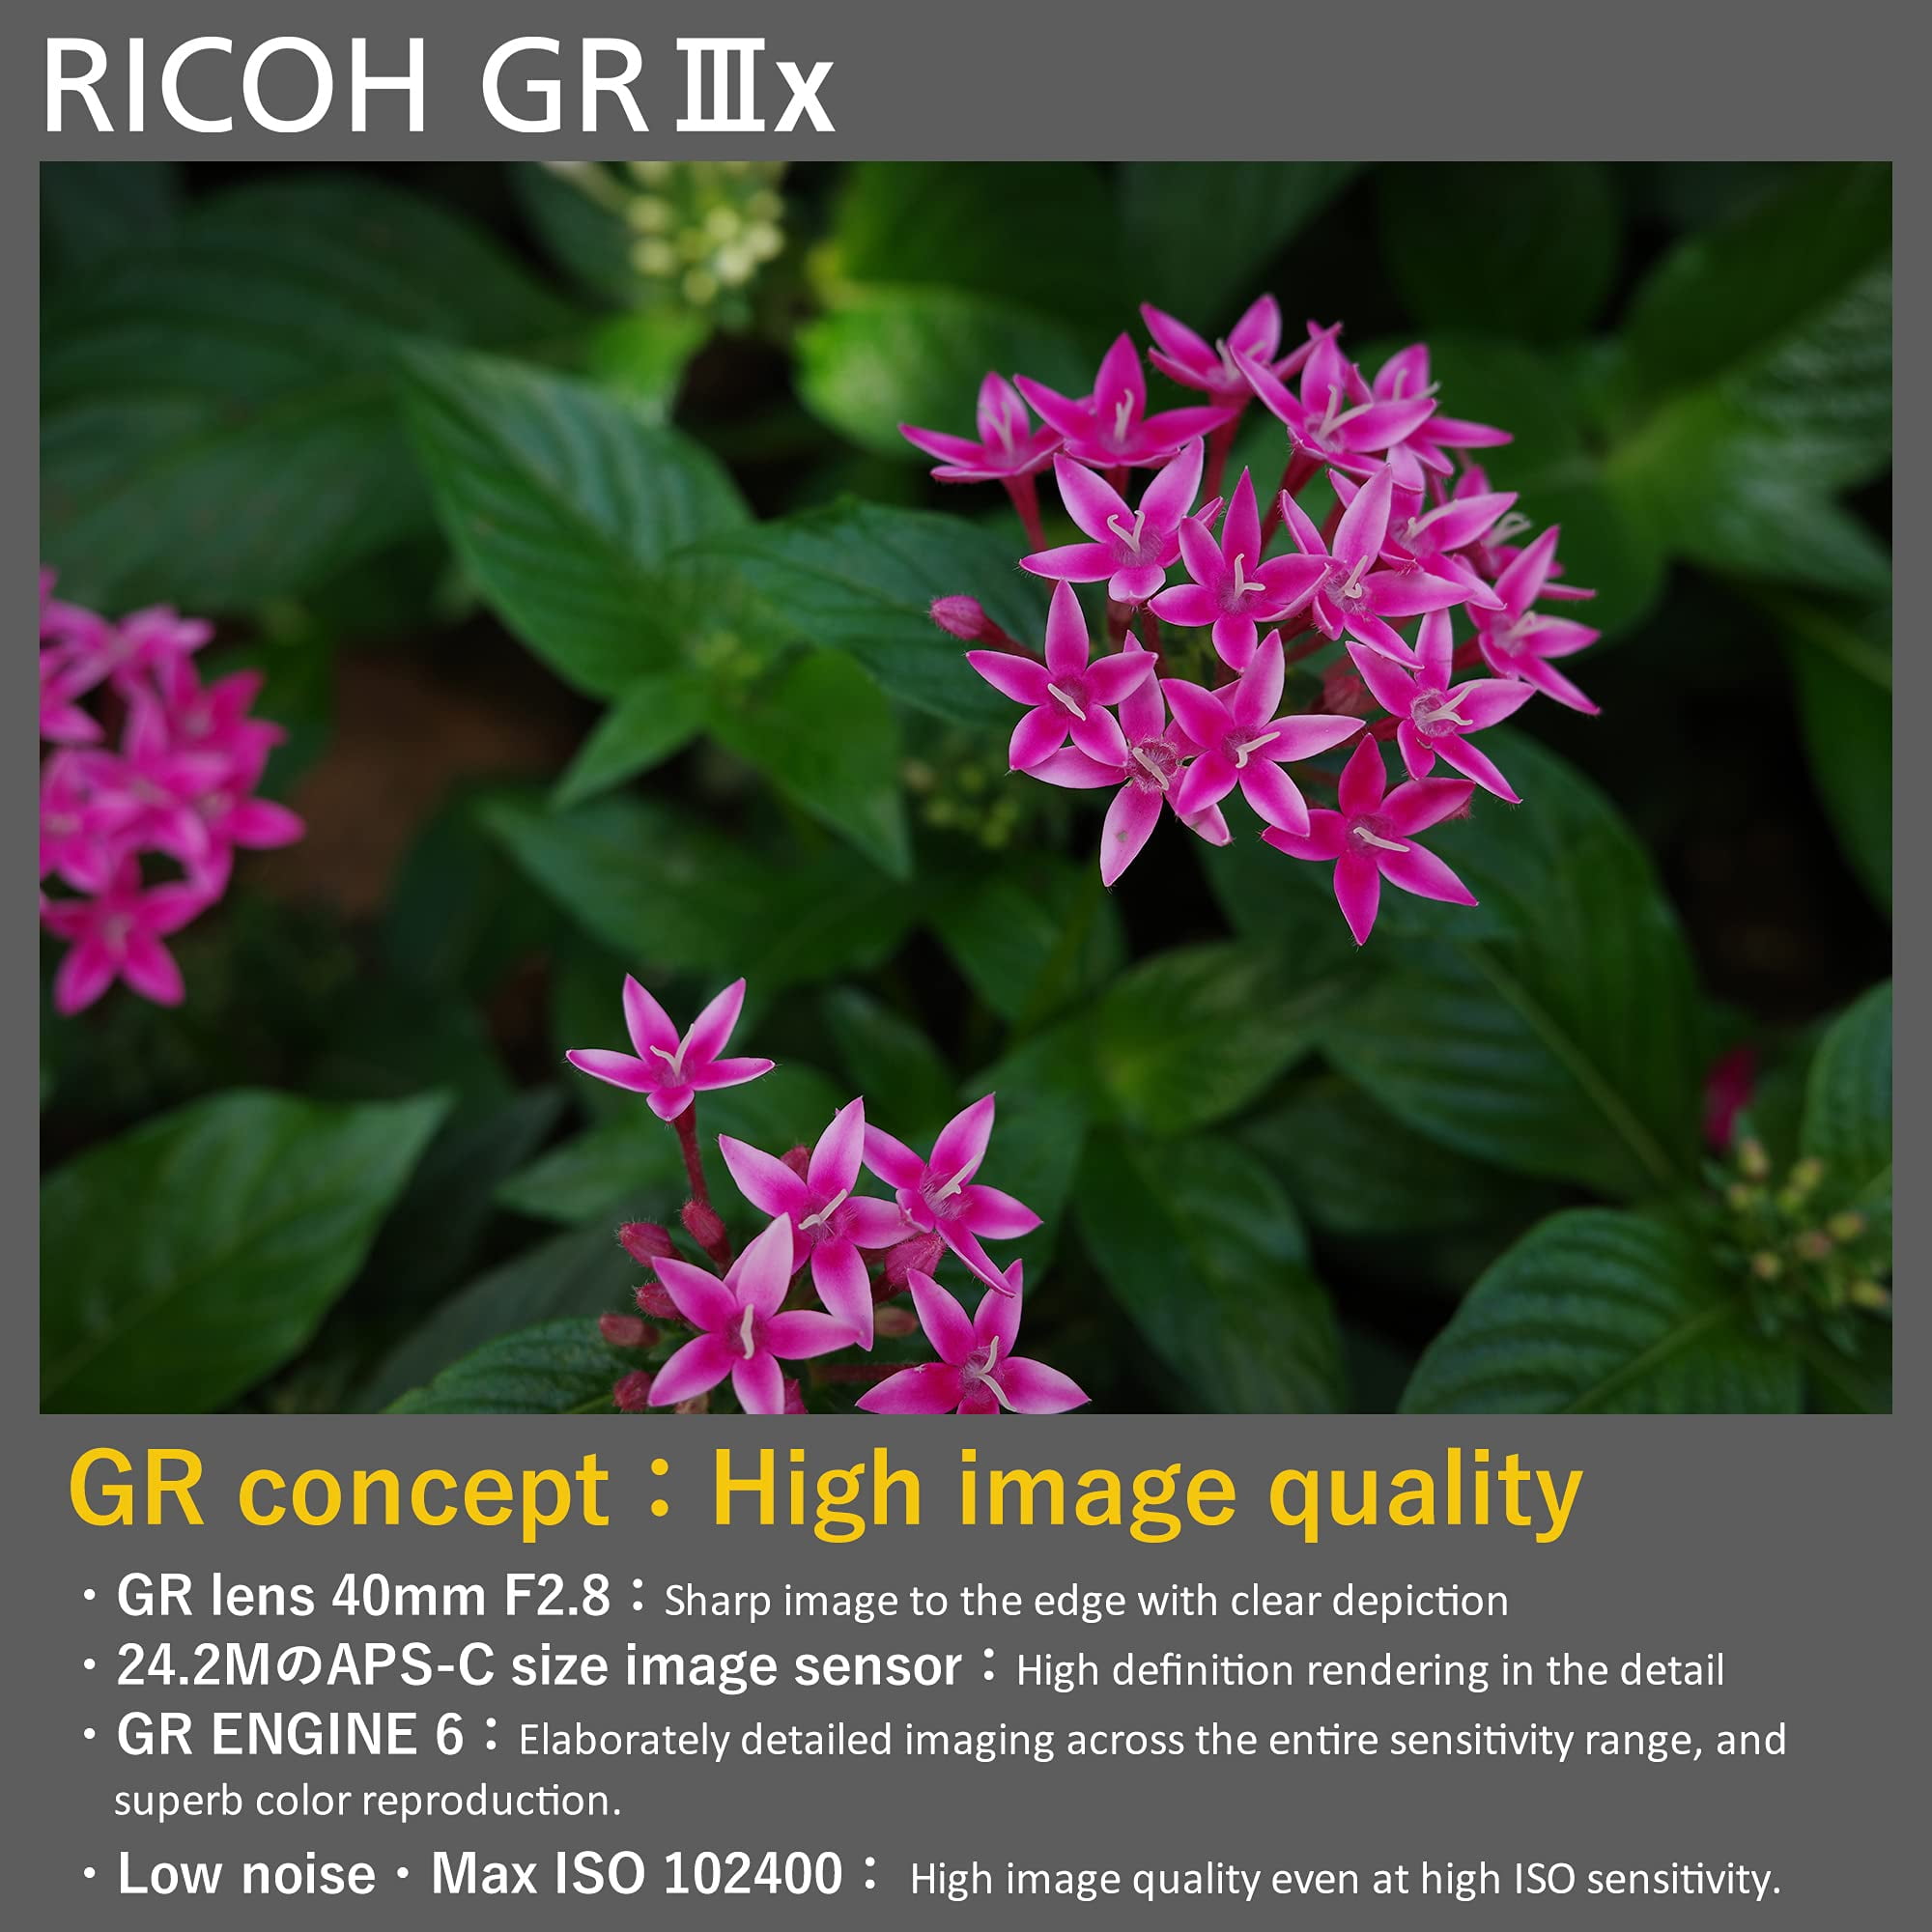  Ricoh GR IIIx, Black, Digital Compact Camera with 24MP APS-C  Size CMOS Sensor, 40mmF2.8 GR Lens (in The 35mm Format) : Electronics